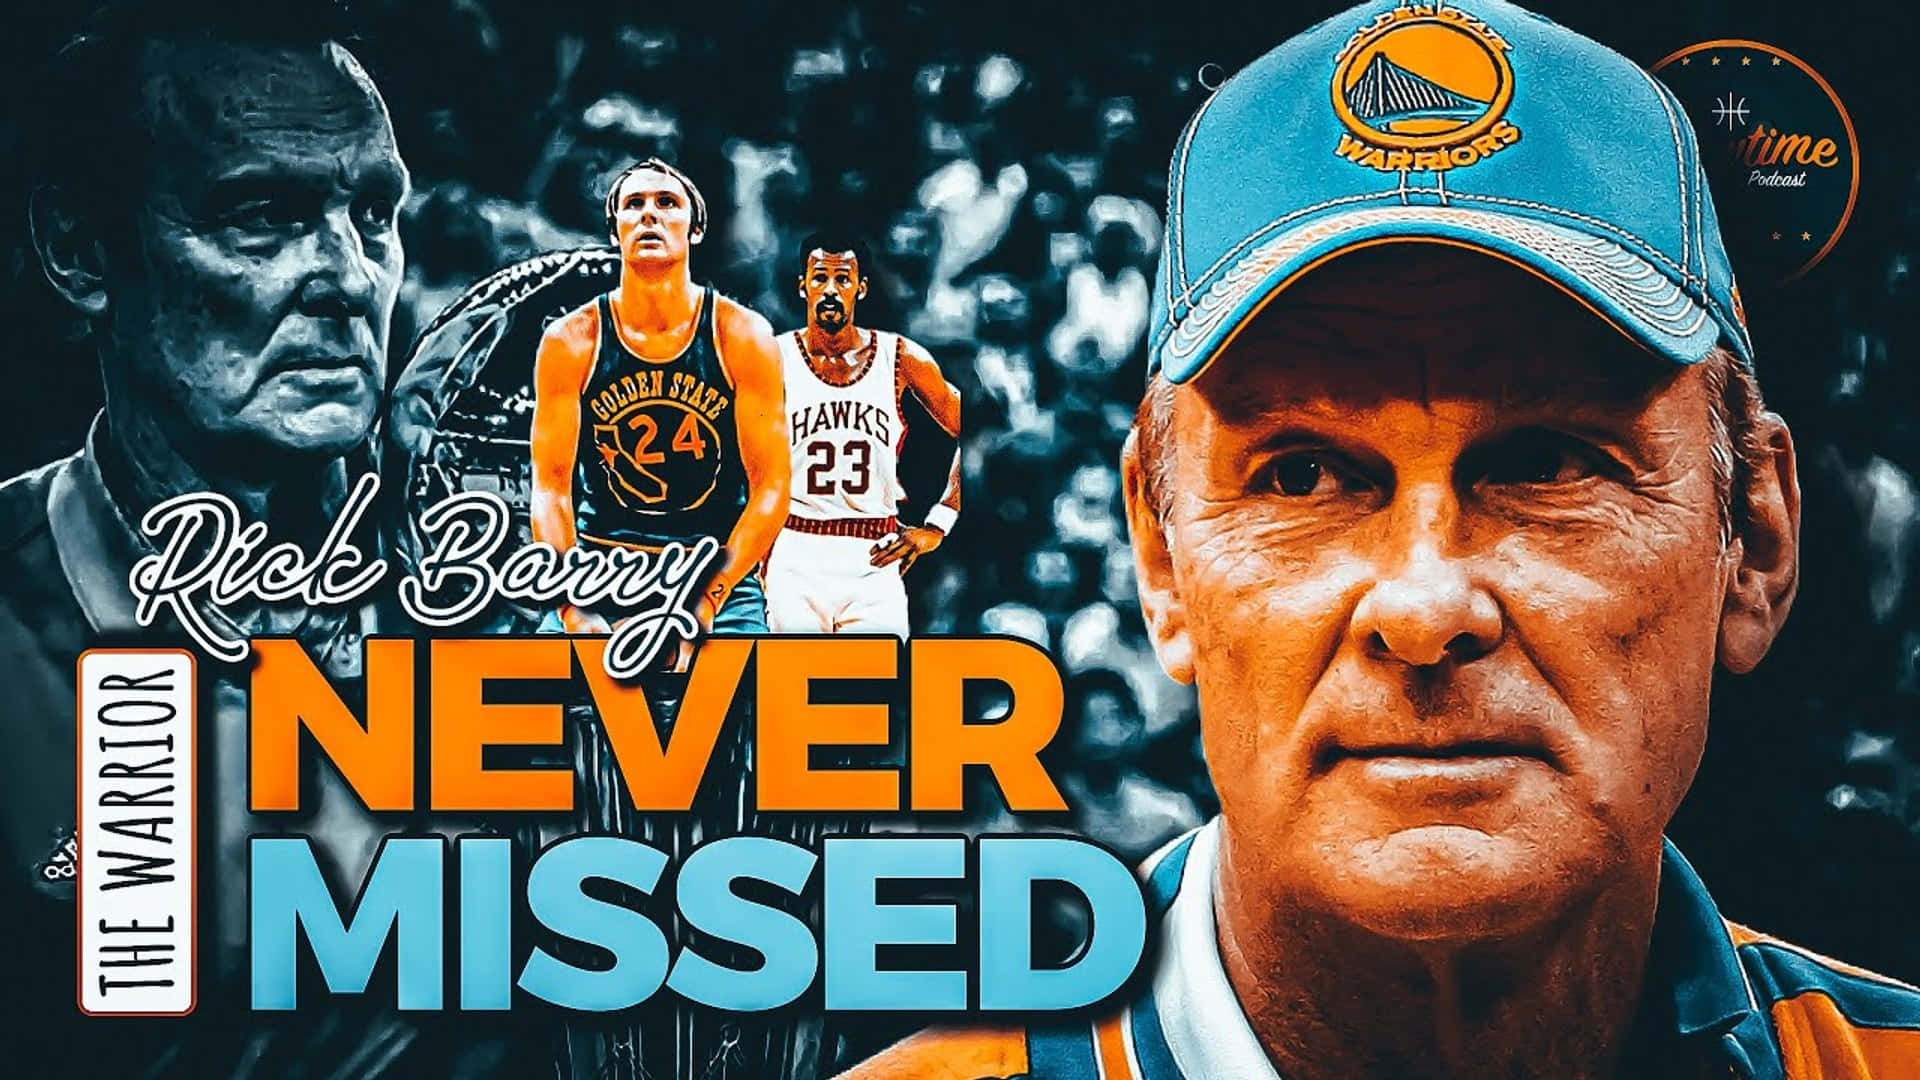 NBA The Warrior Never Missed Rick Barry Poster Wallpaper